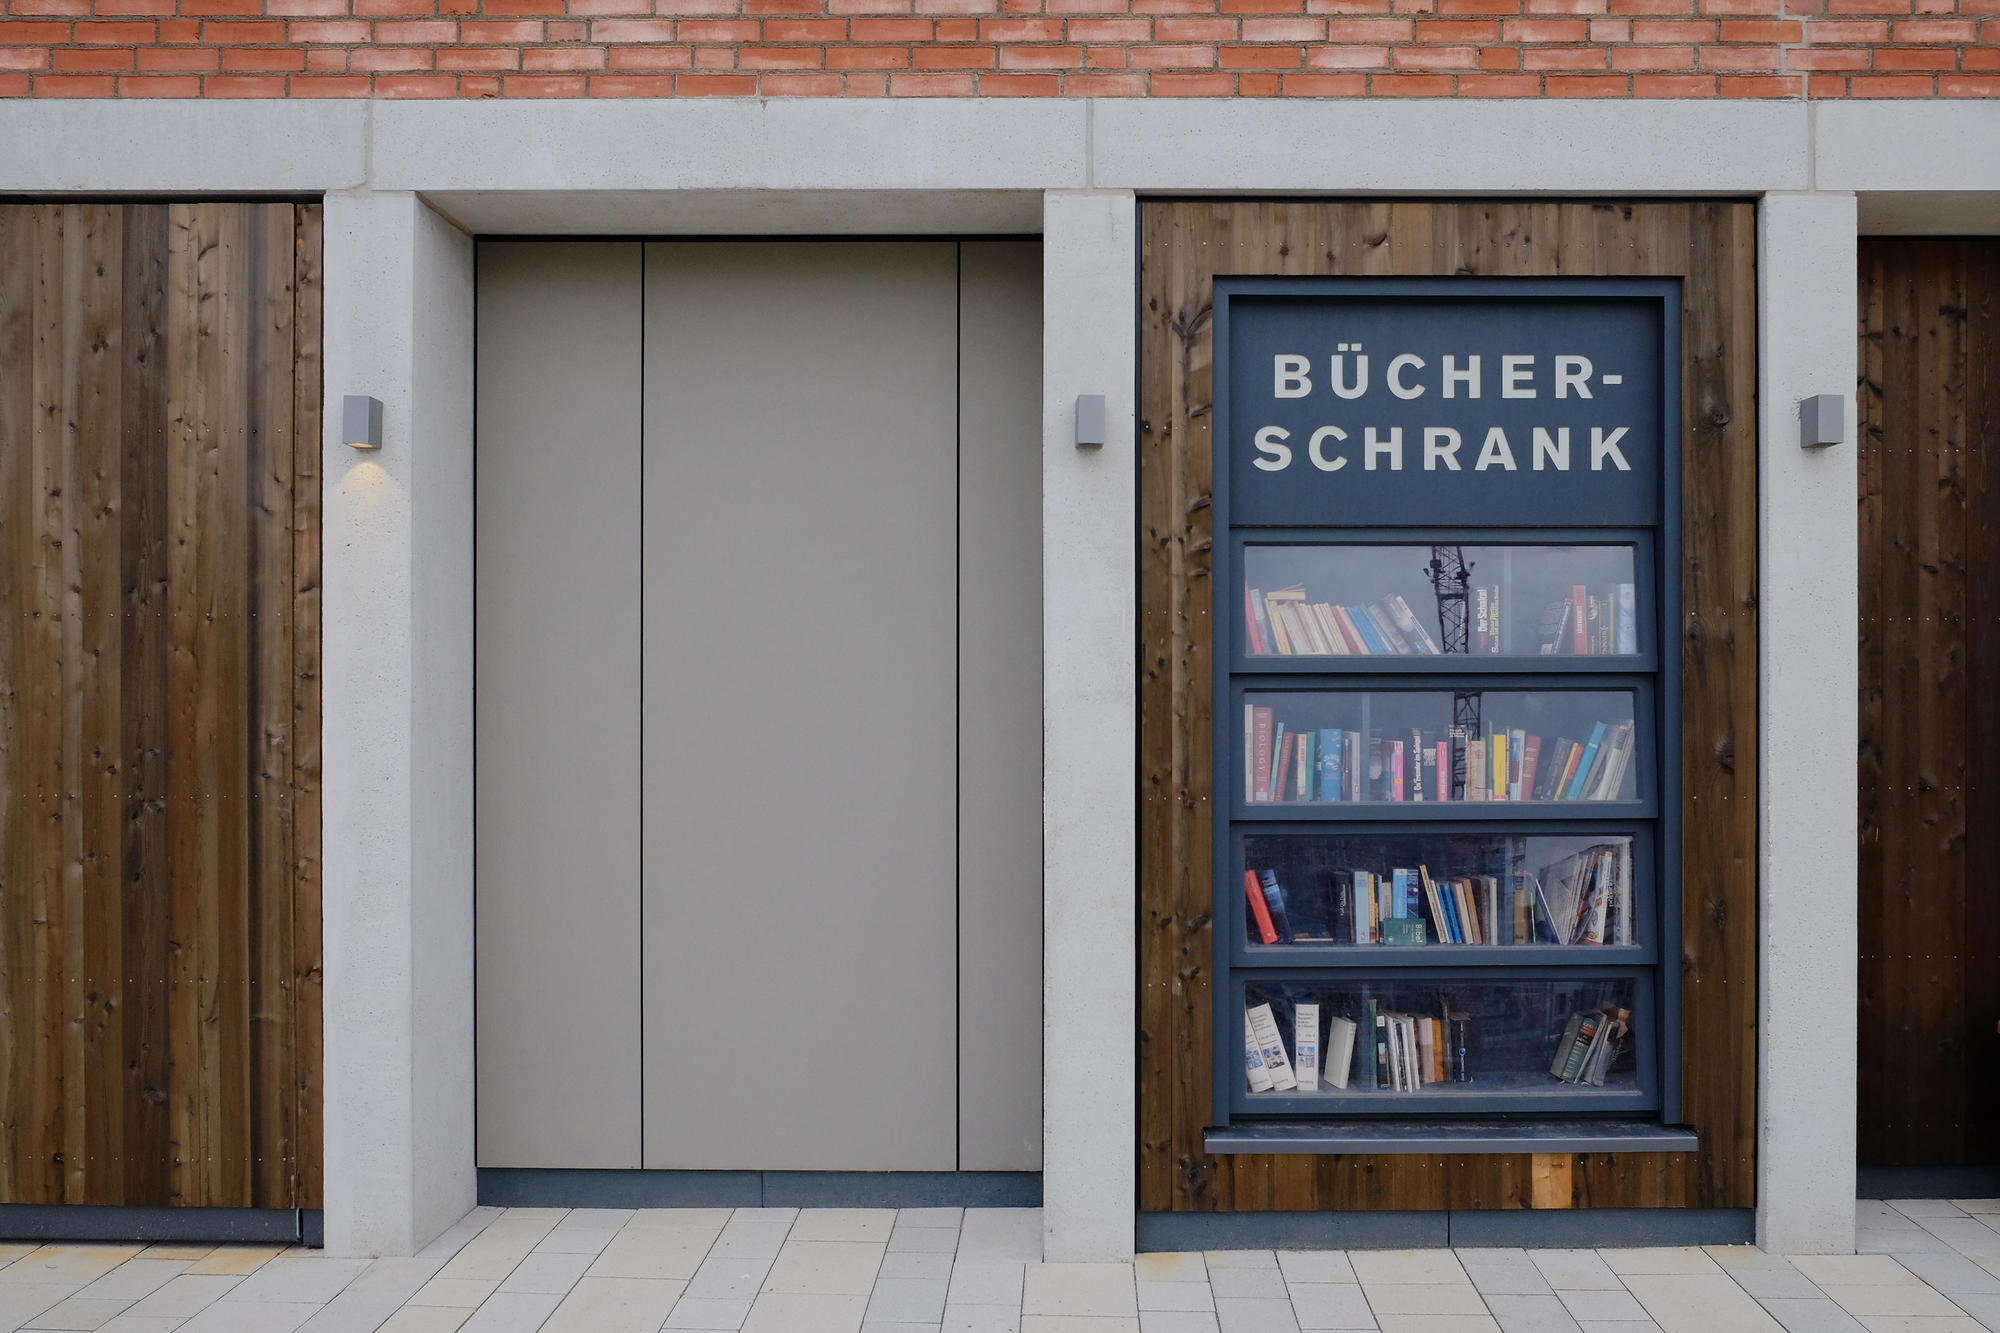 Public  bookcases offer a chance to pass on books you have read and discover new works for free. They put a “literary” stamp on everyday life, which is a focus in one of Martus’s current research projects.